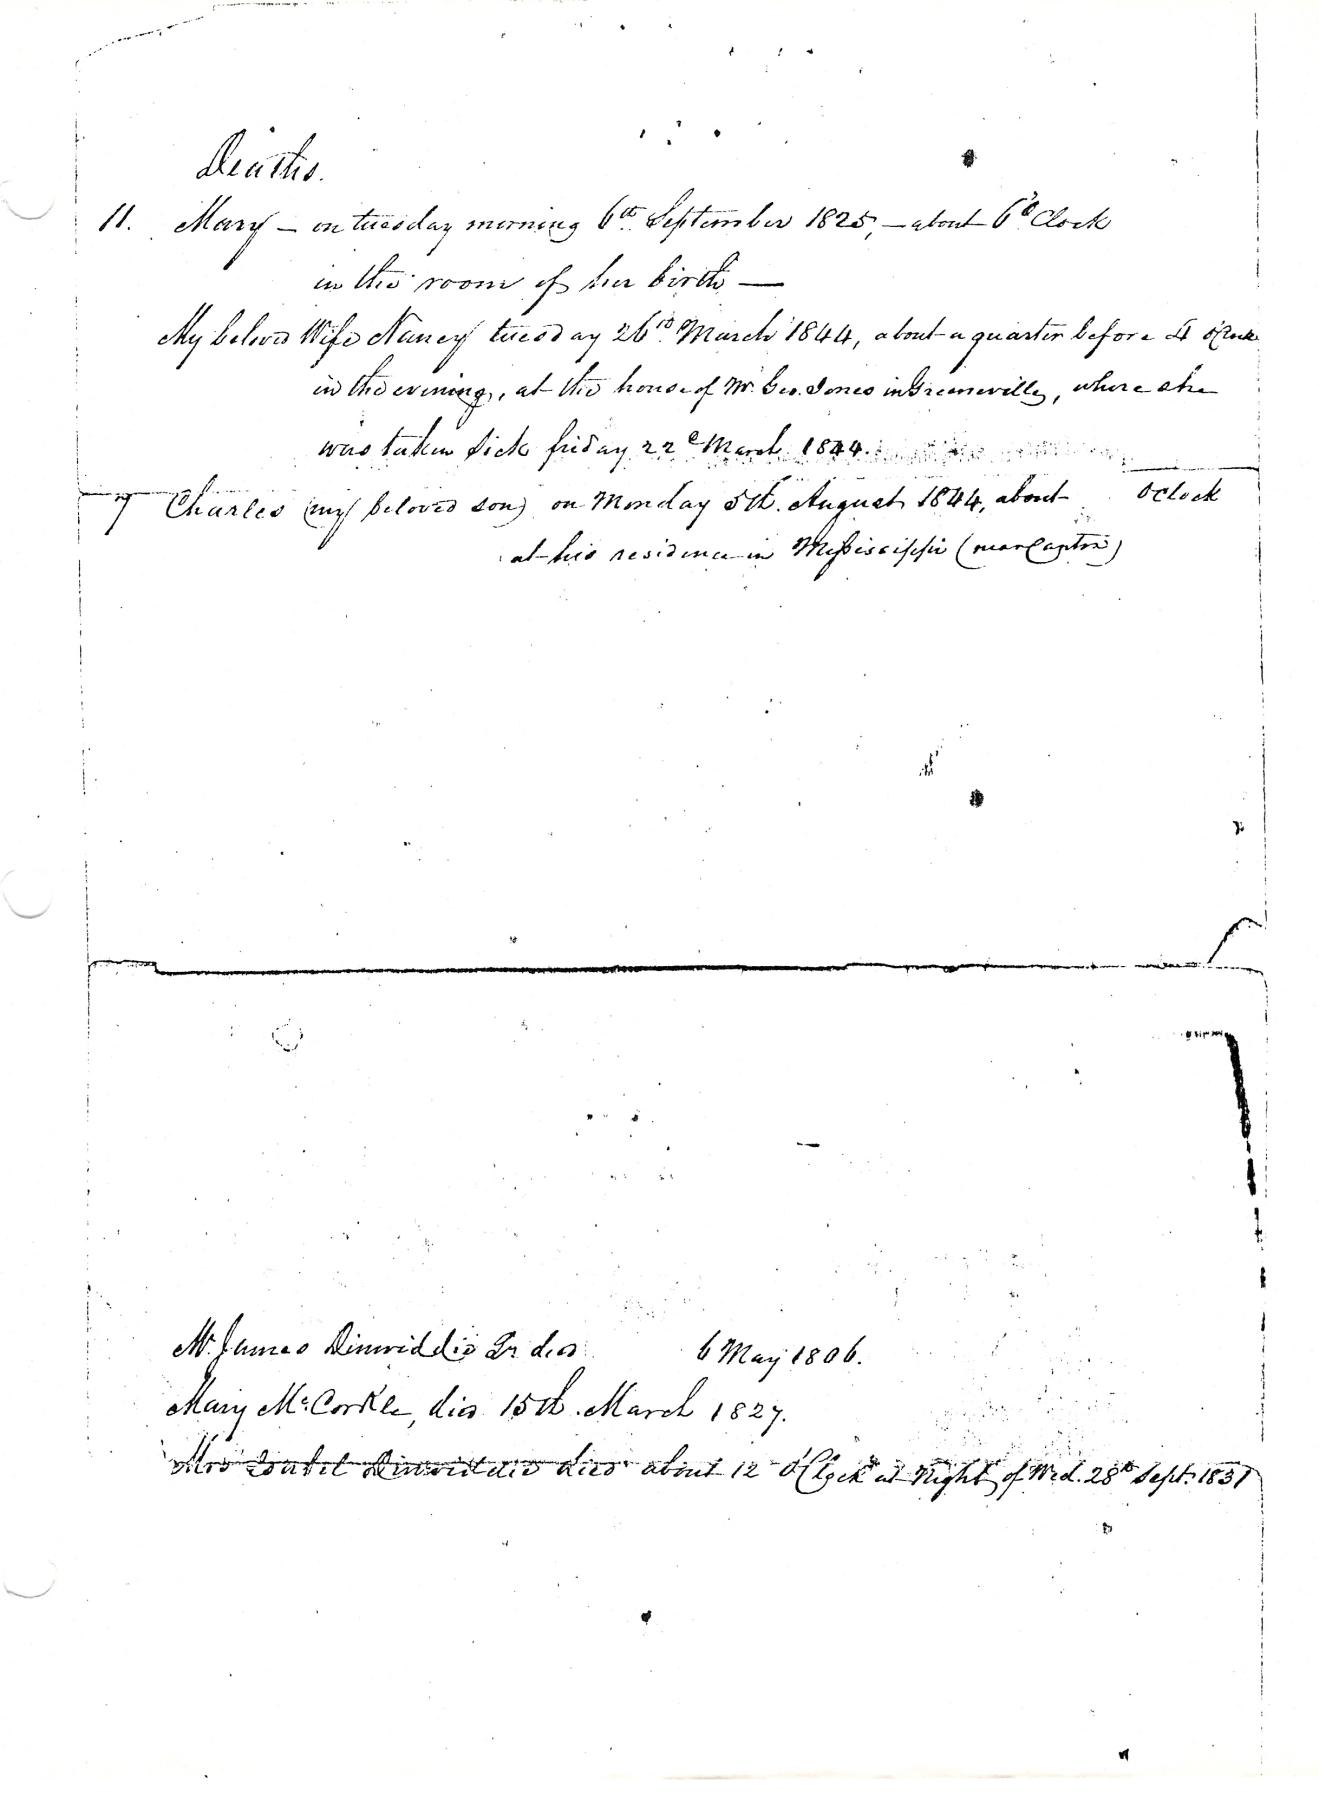 Valentine Sevier Family Record - Deaths